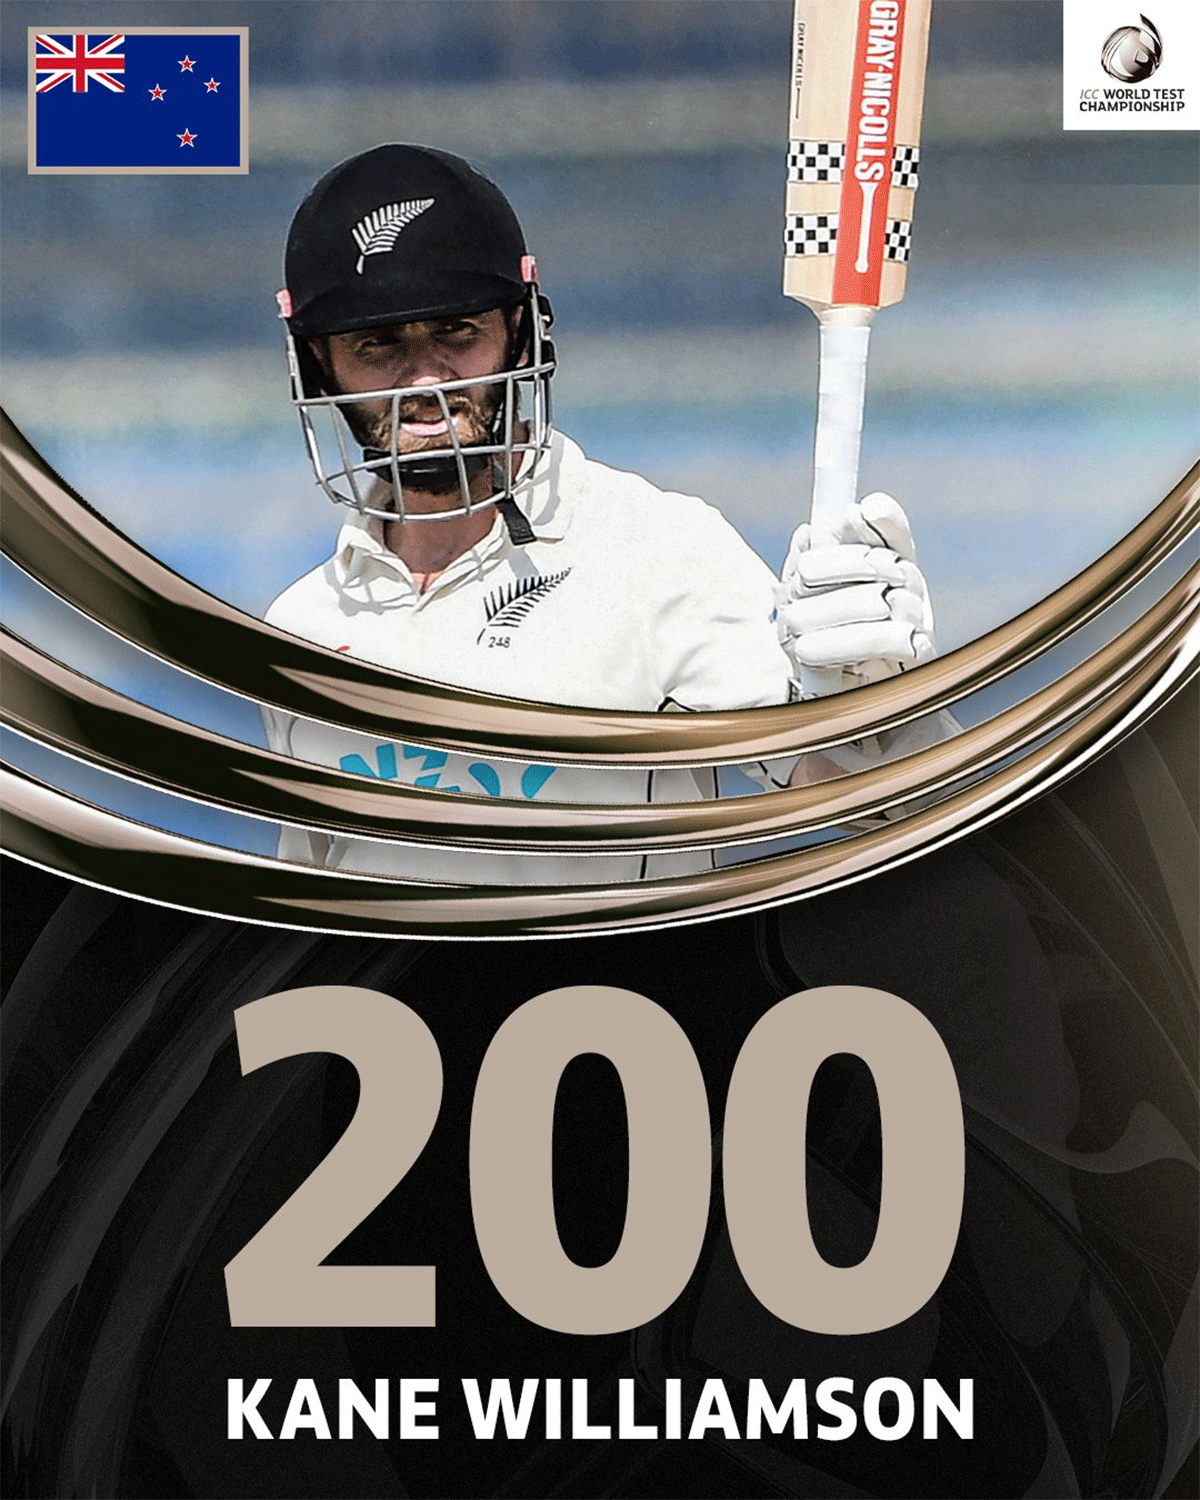 Kane Williamson hit 200 not out against Pakistan in Karachi in the opening Test